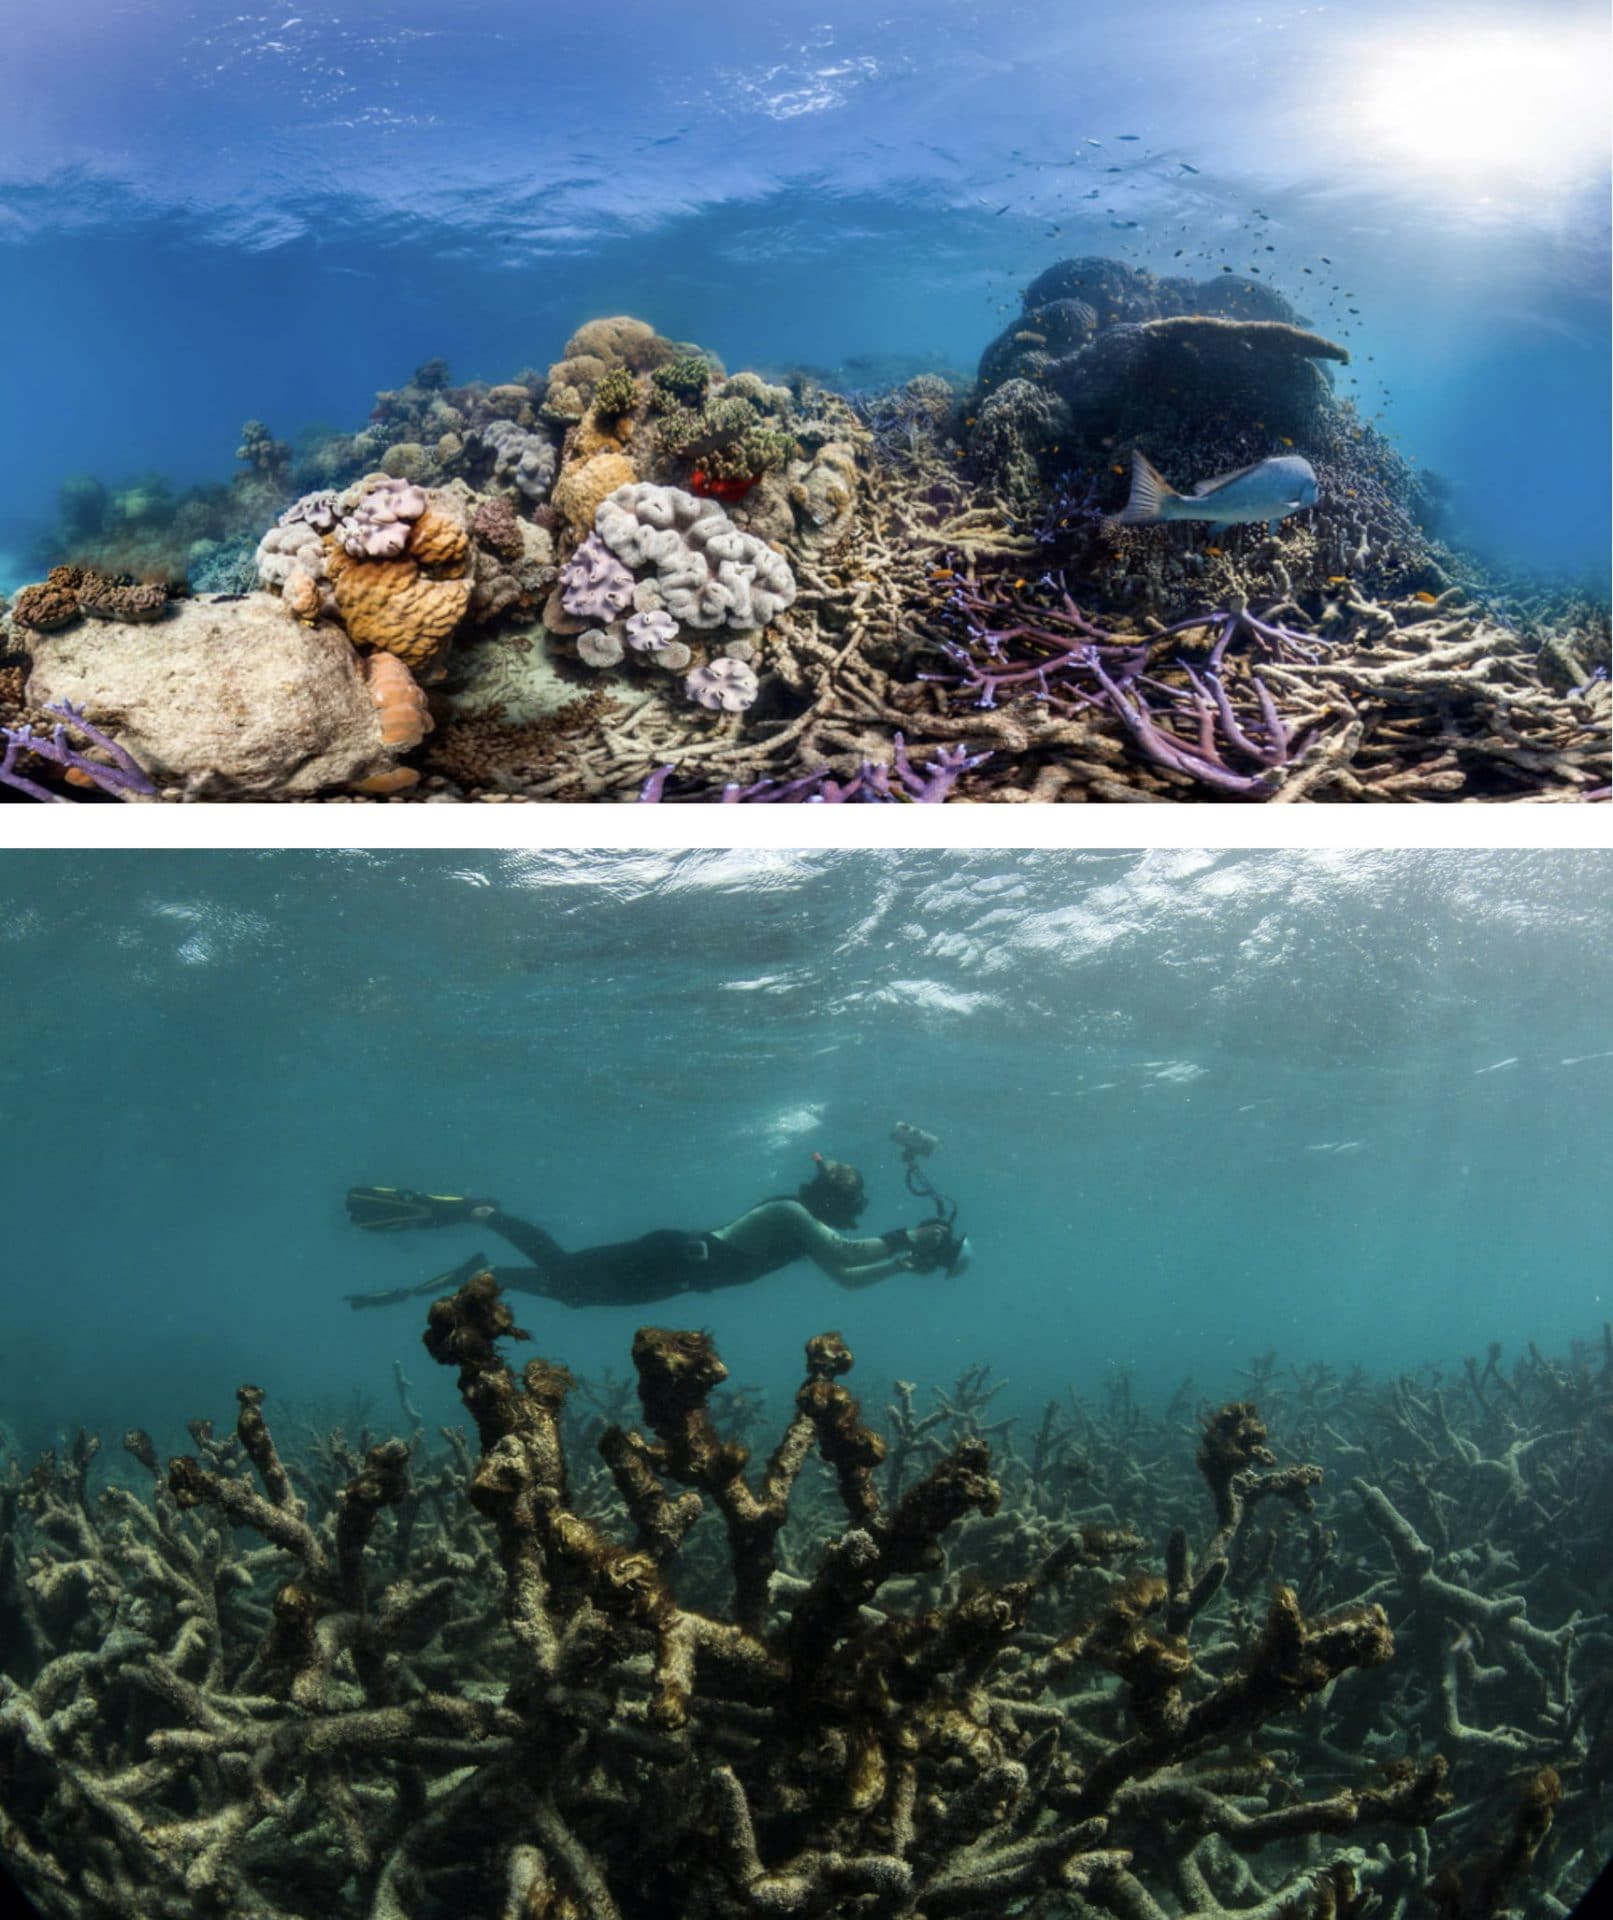 bleached coral reef before and after